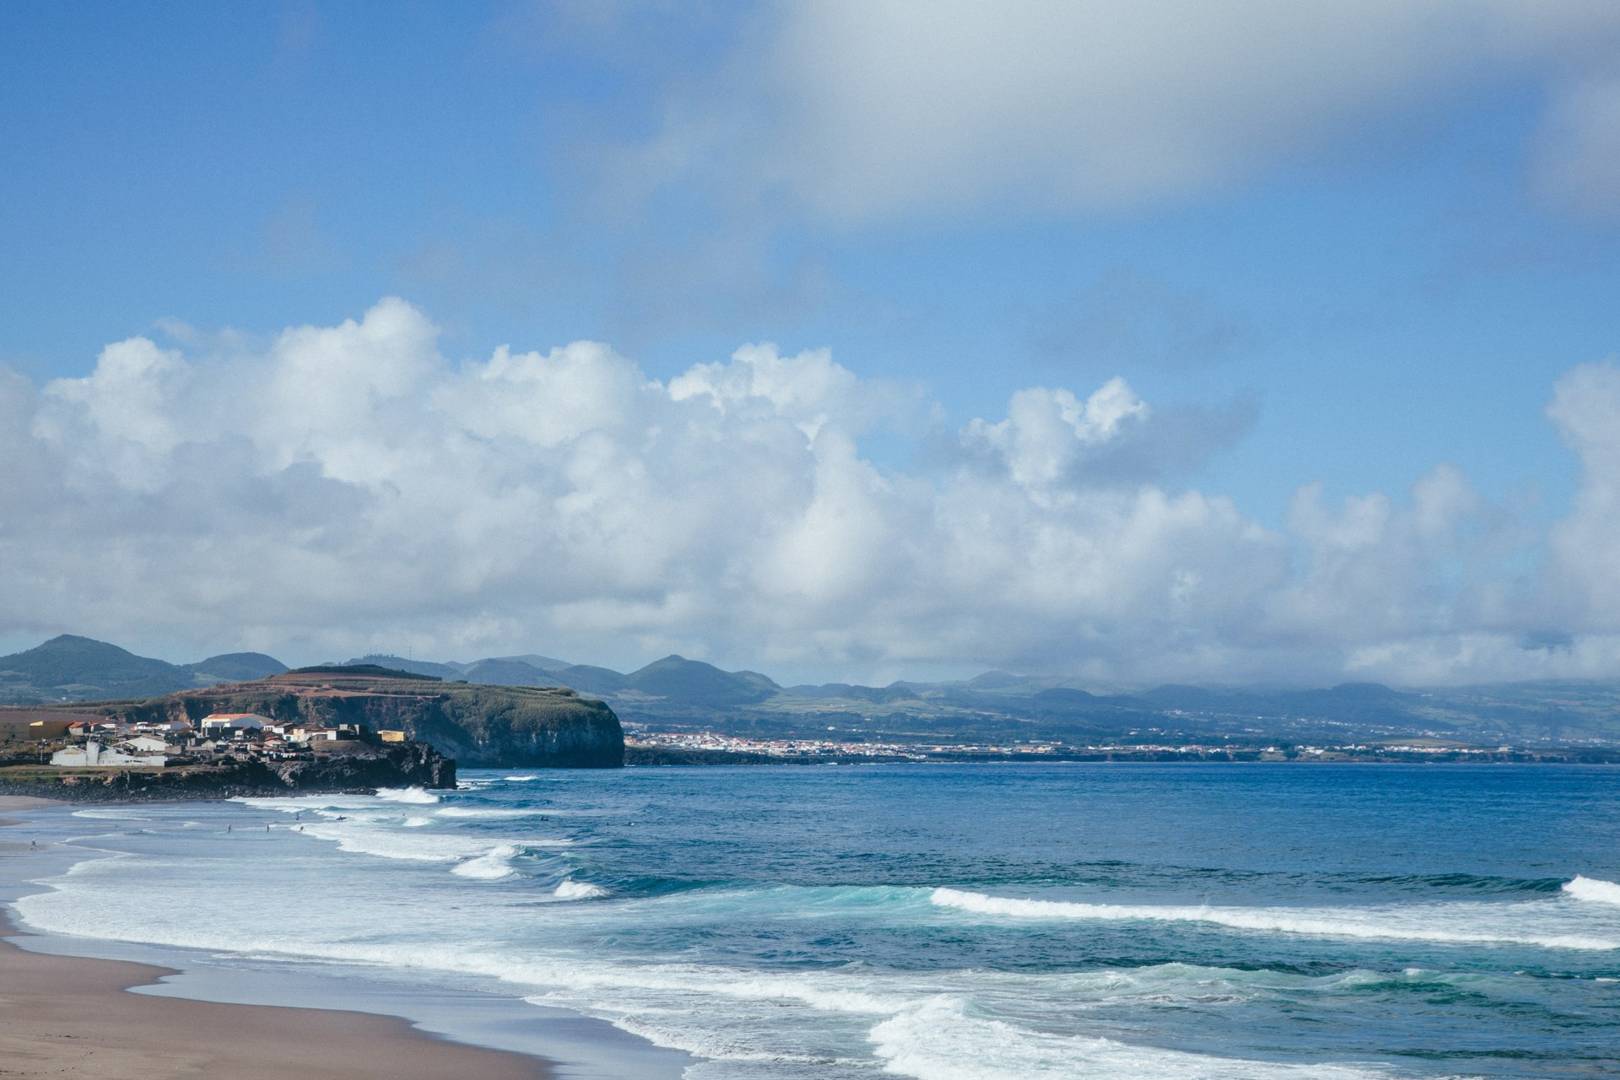 France Naked Beach - Azores islands - things to do and places to stay in SÃ£o ...